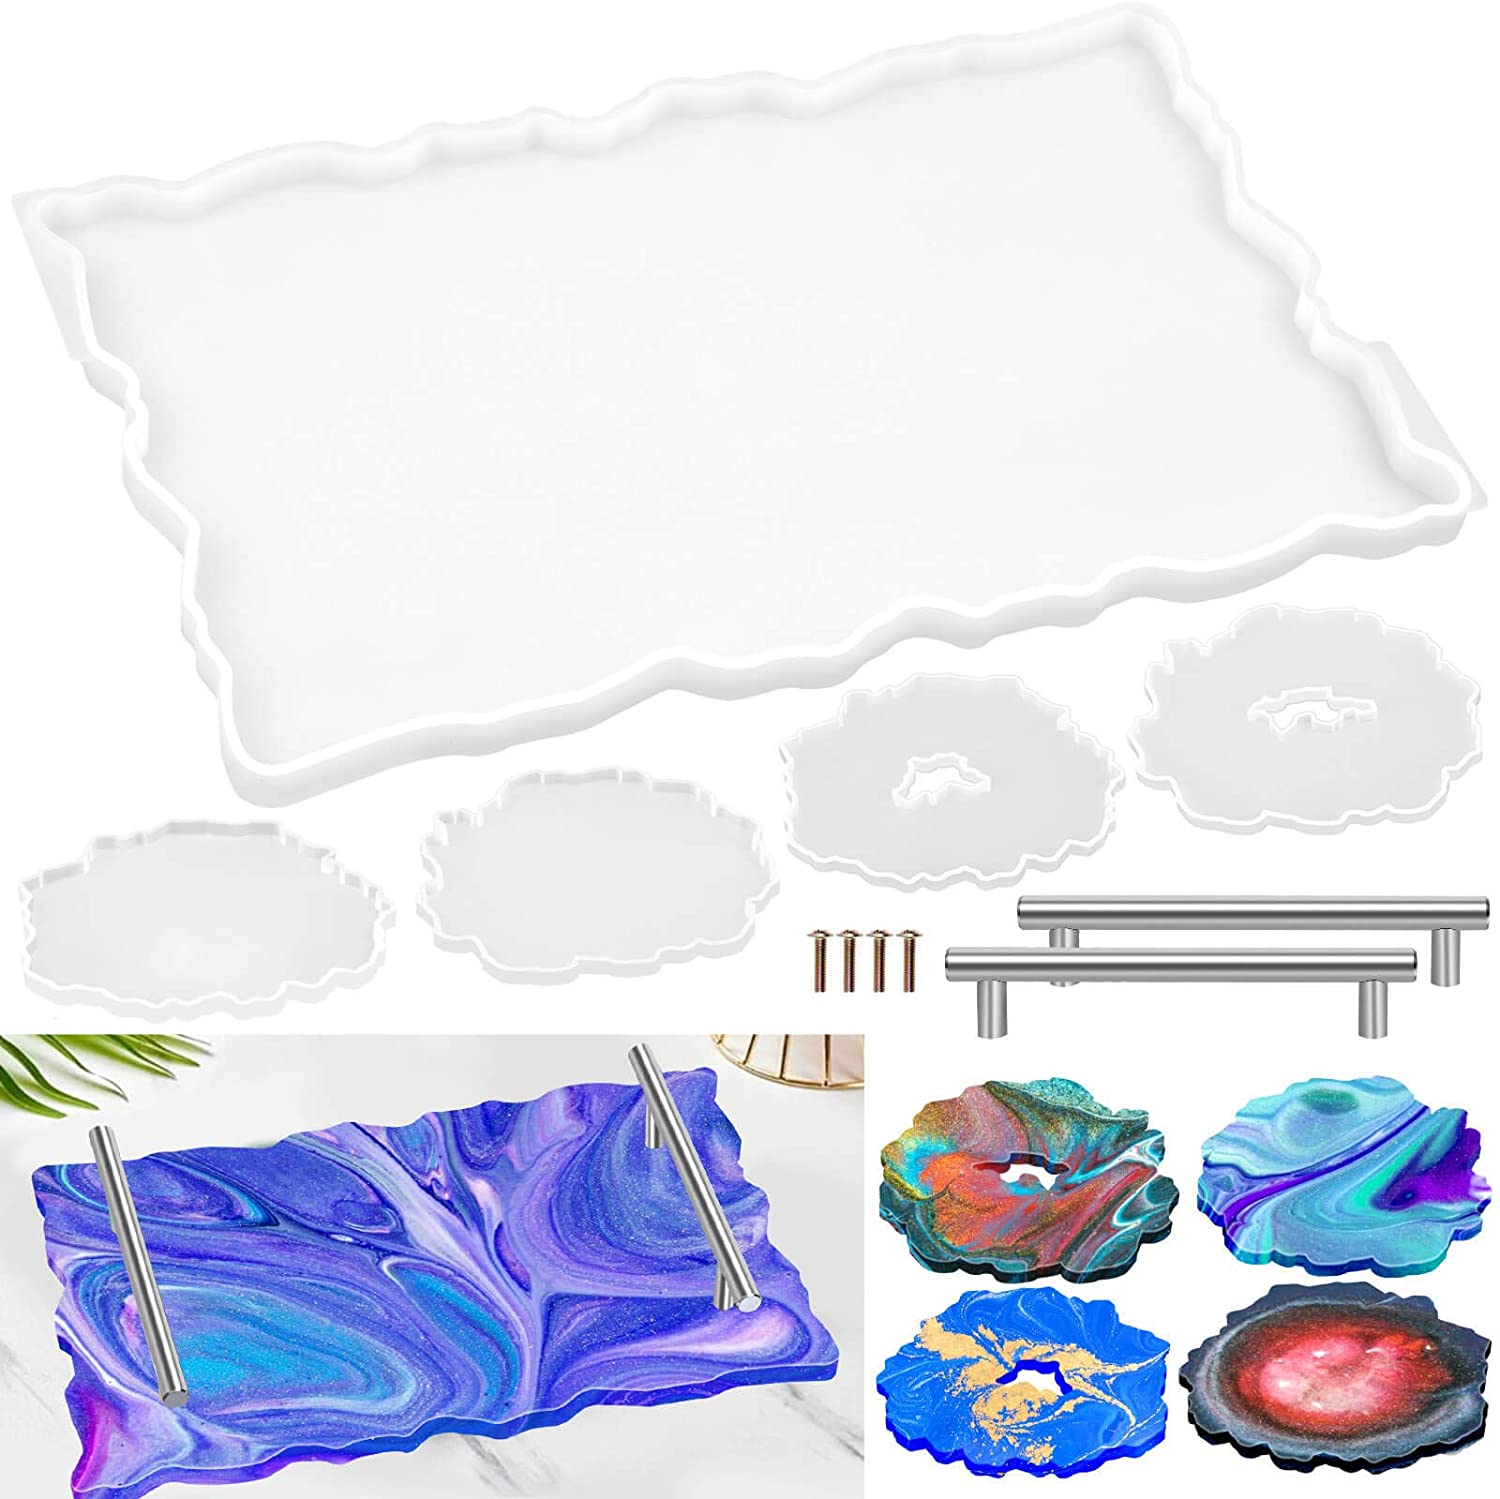 Resin Tray Mold Set 1Pc Resin Tray Mold Come with 4 Pcs Coaster Molds and 2Pcs Silver Handles DIY Home Decoration